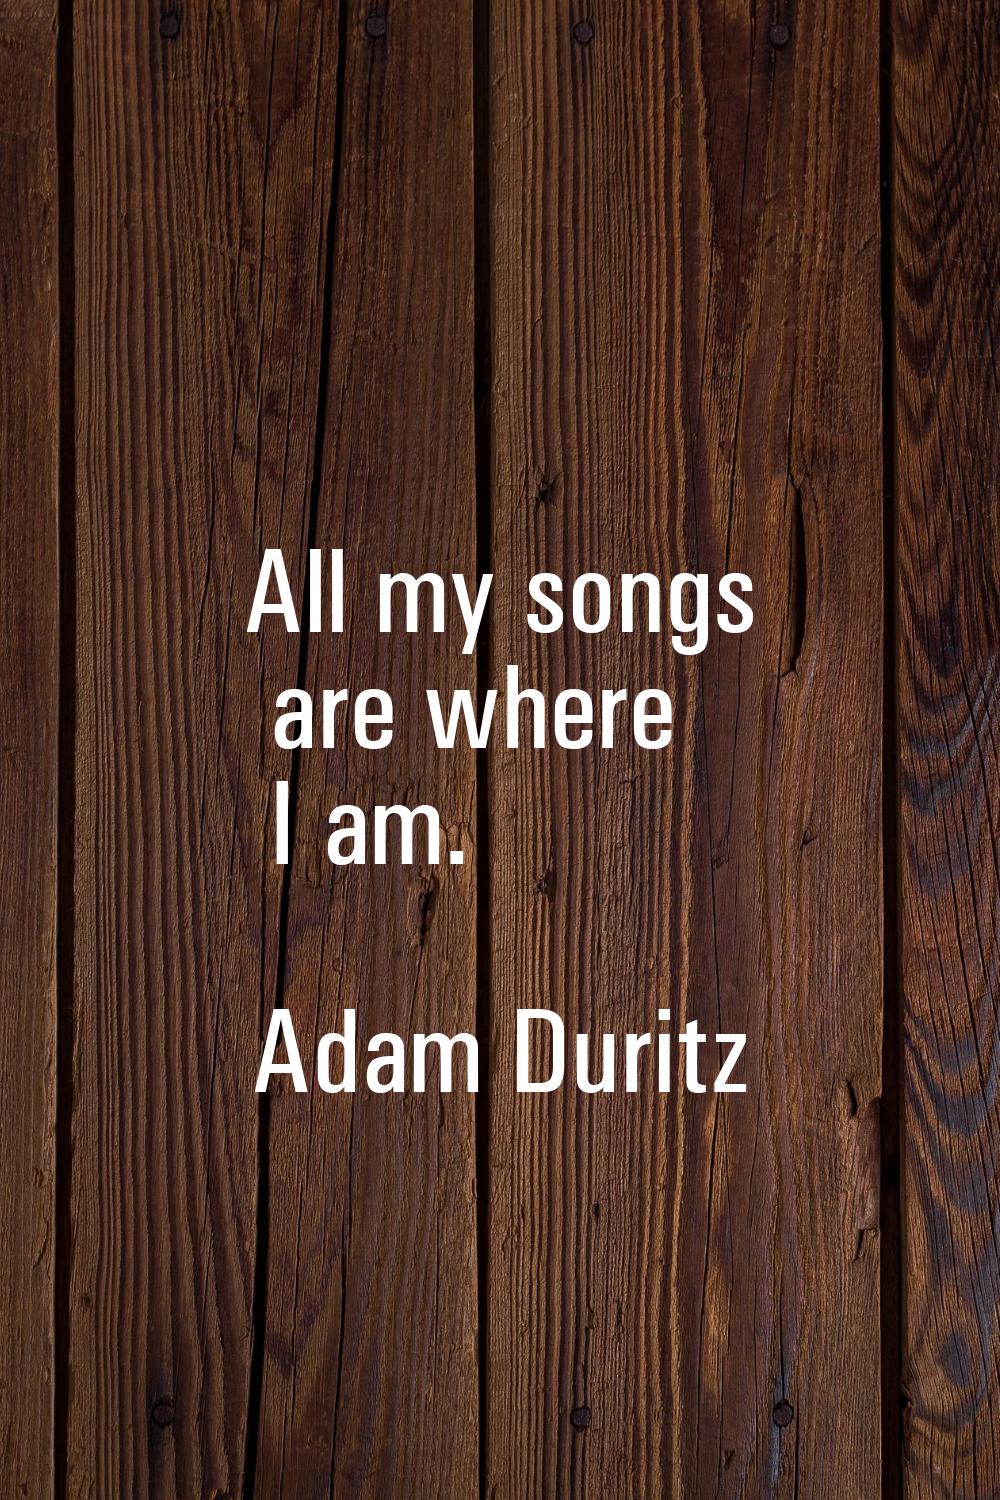 All my songs are where I am.